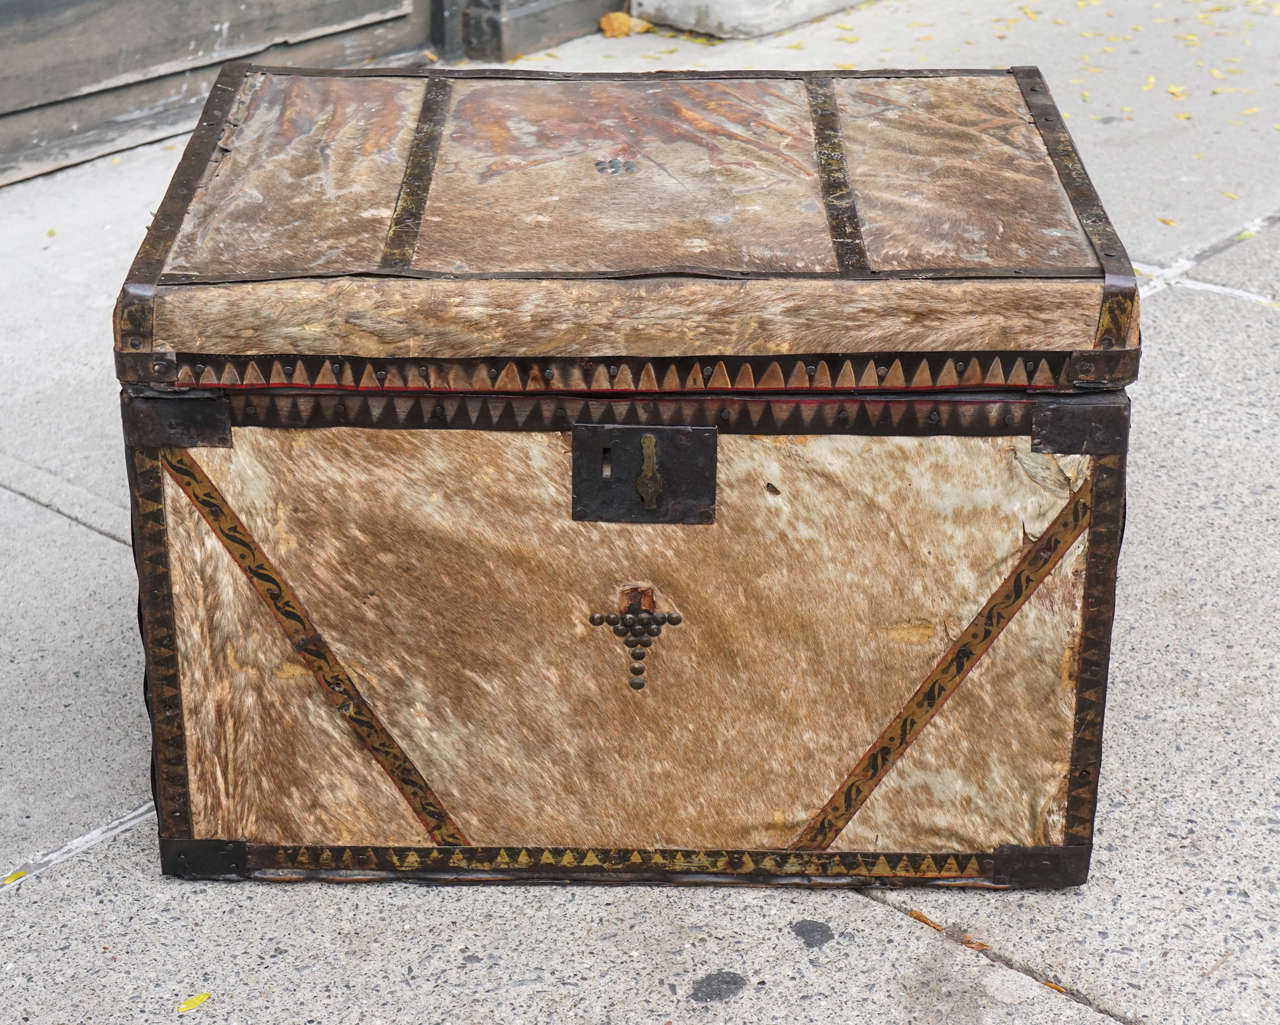 This unusual trunk made in america circa 1870 to 1880 has a western vibe but could have been made on the east coast as a special order. Created from pine which is them covered in pony skin and edged with tole decorated strips of tin   at the edges